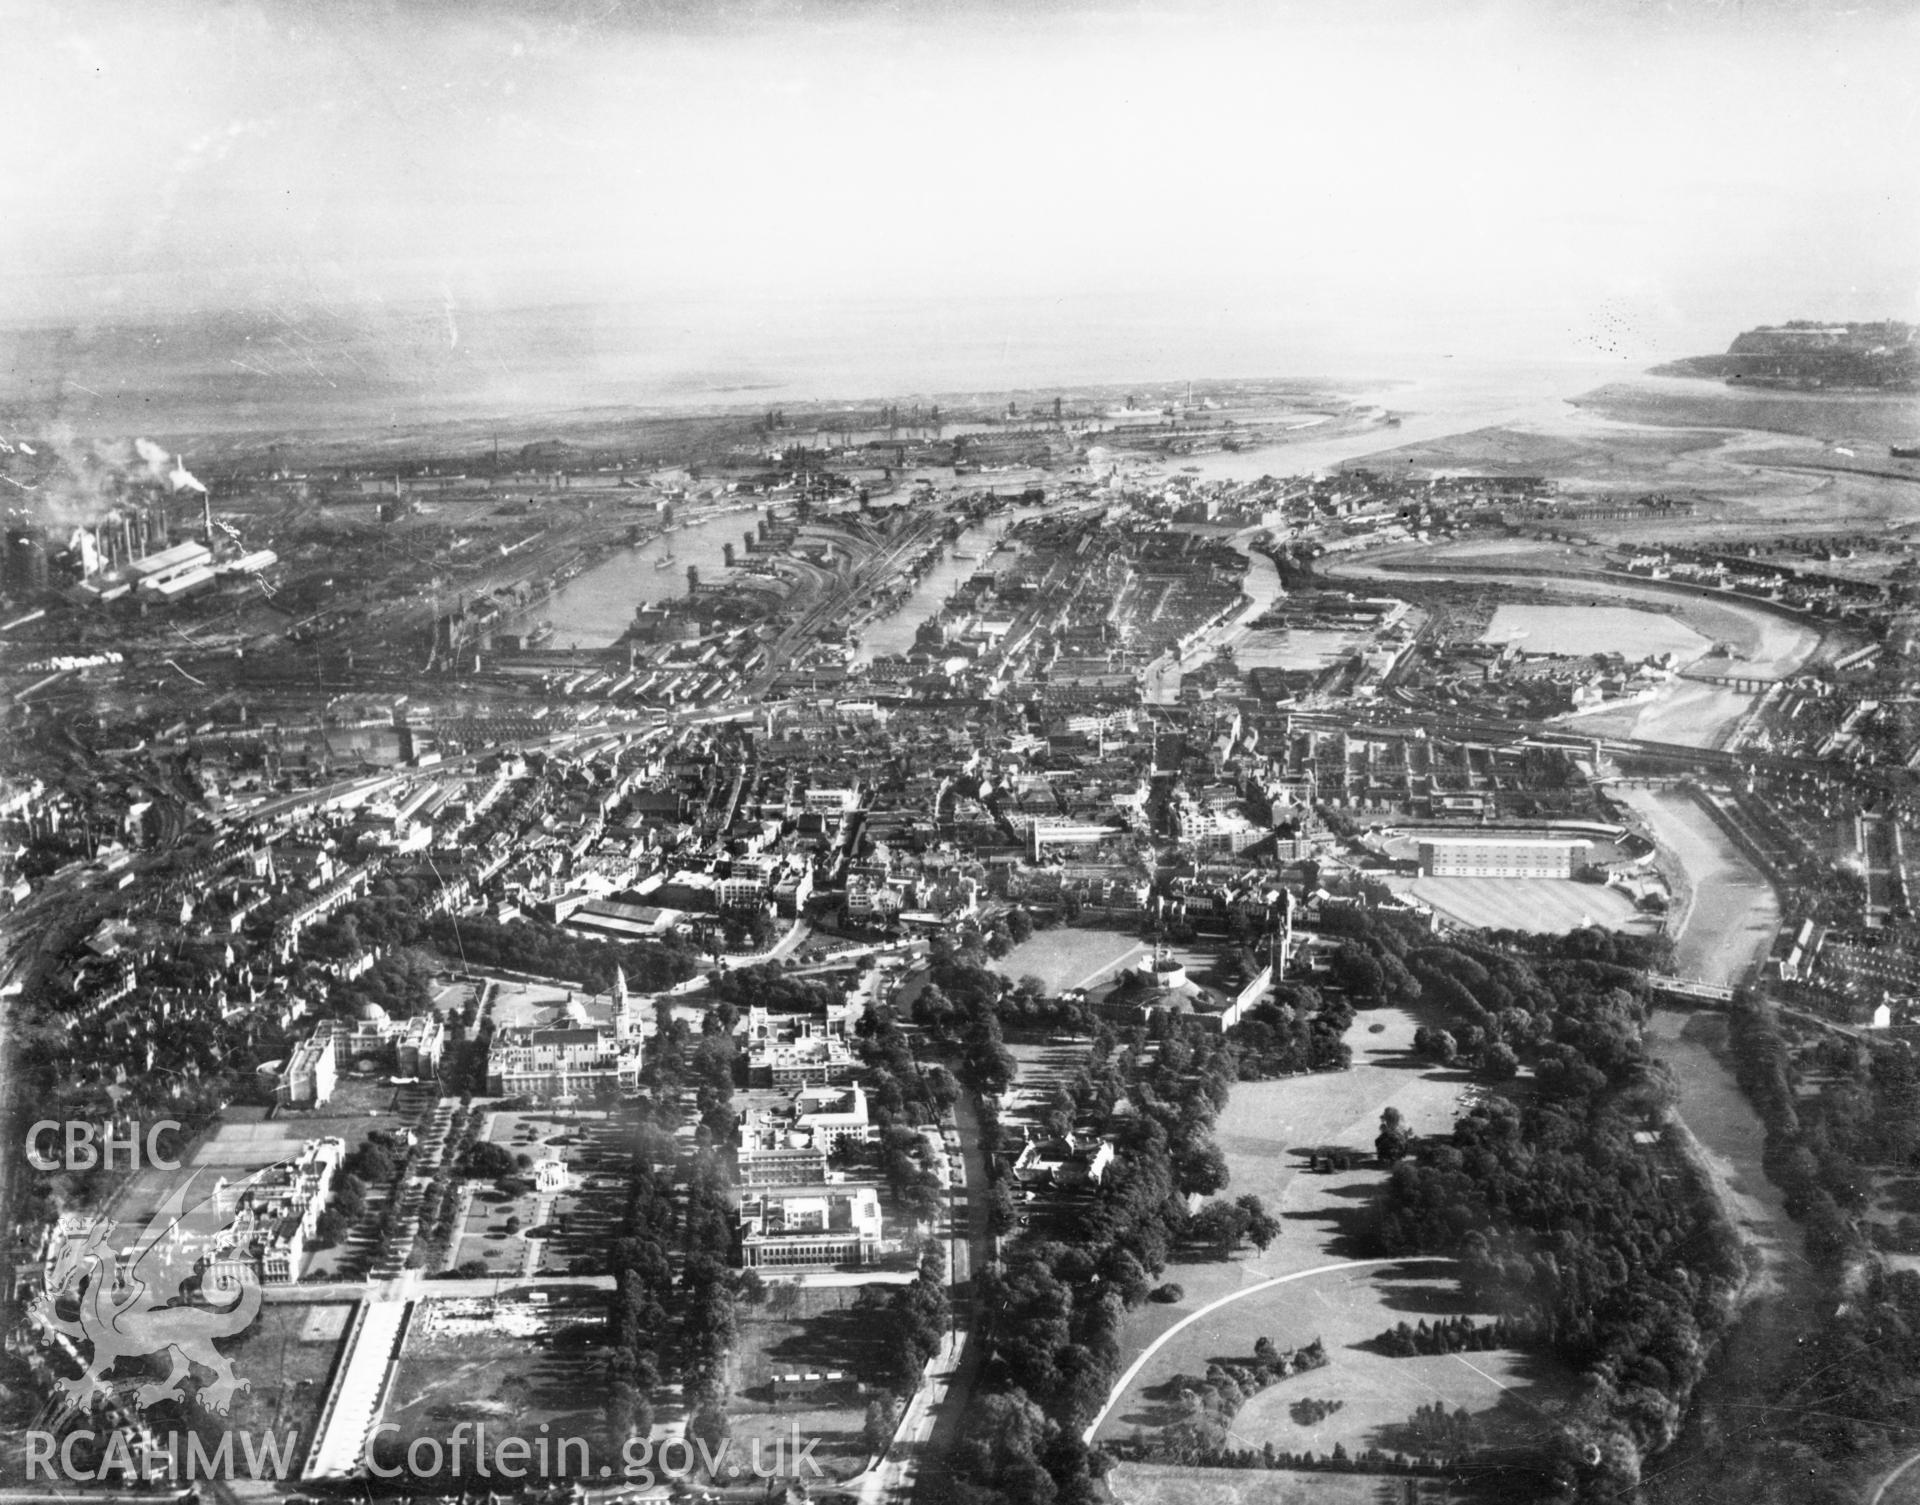 General view of Cardiff. Oblique aerial photograph.